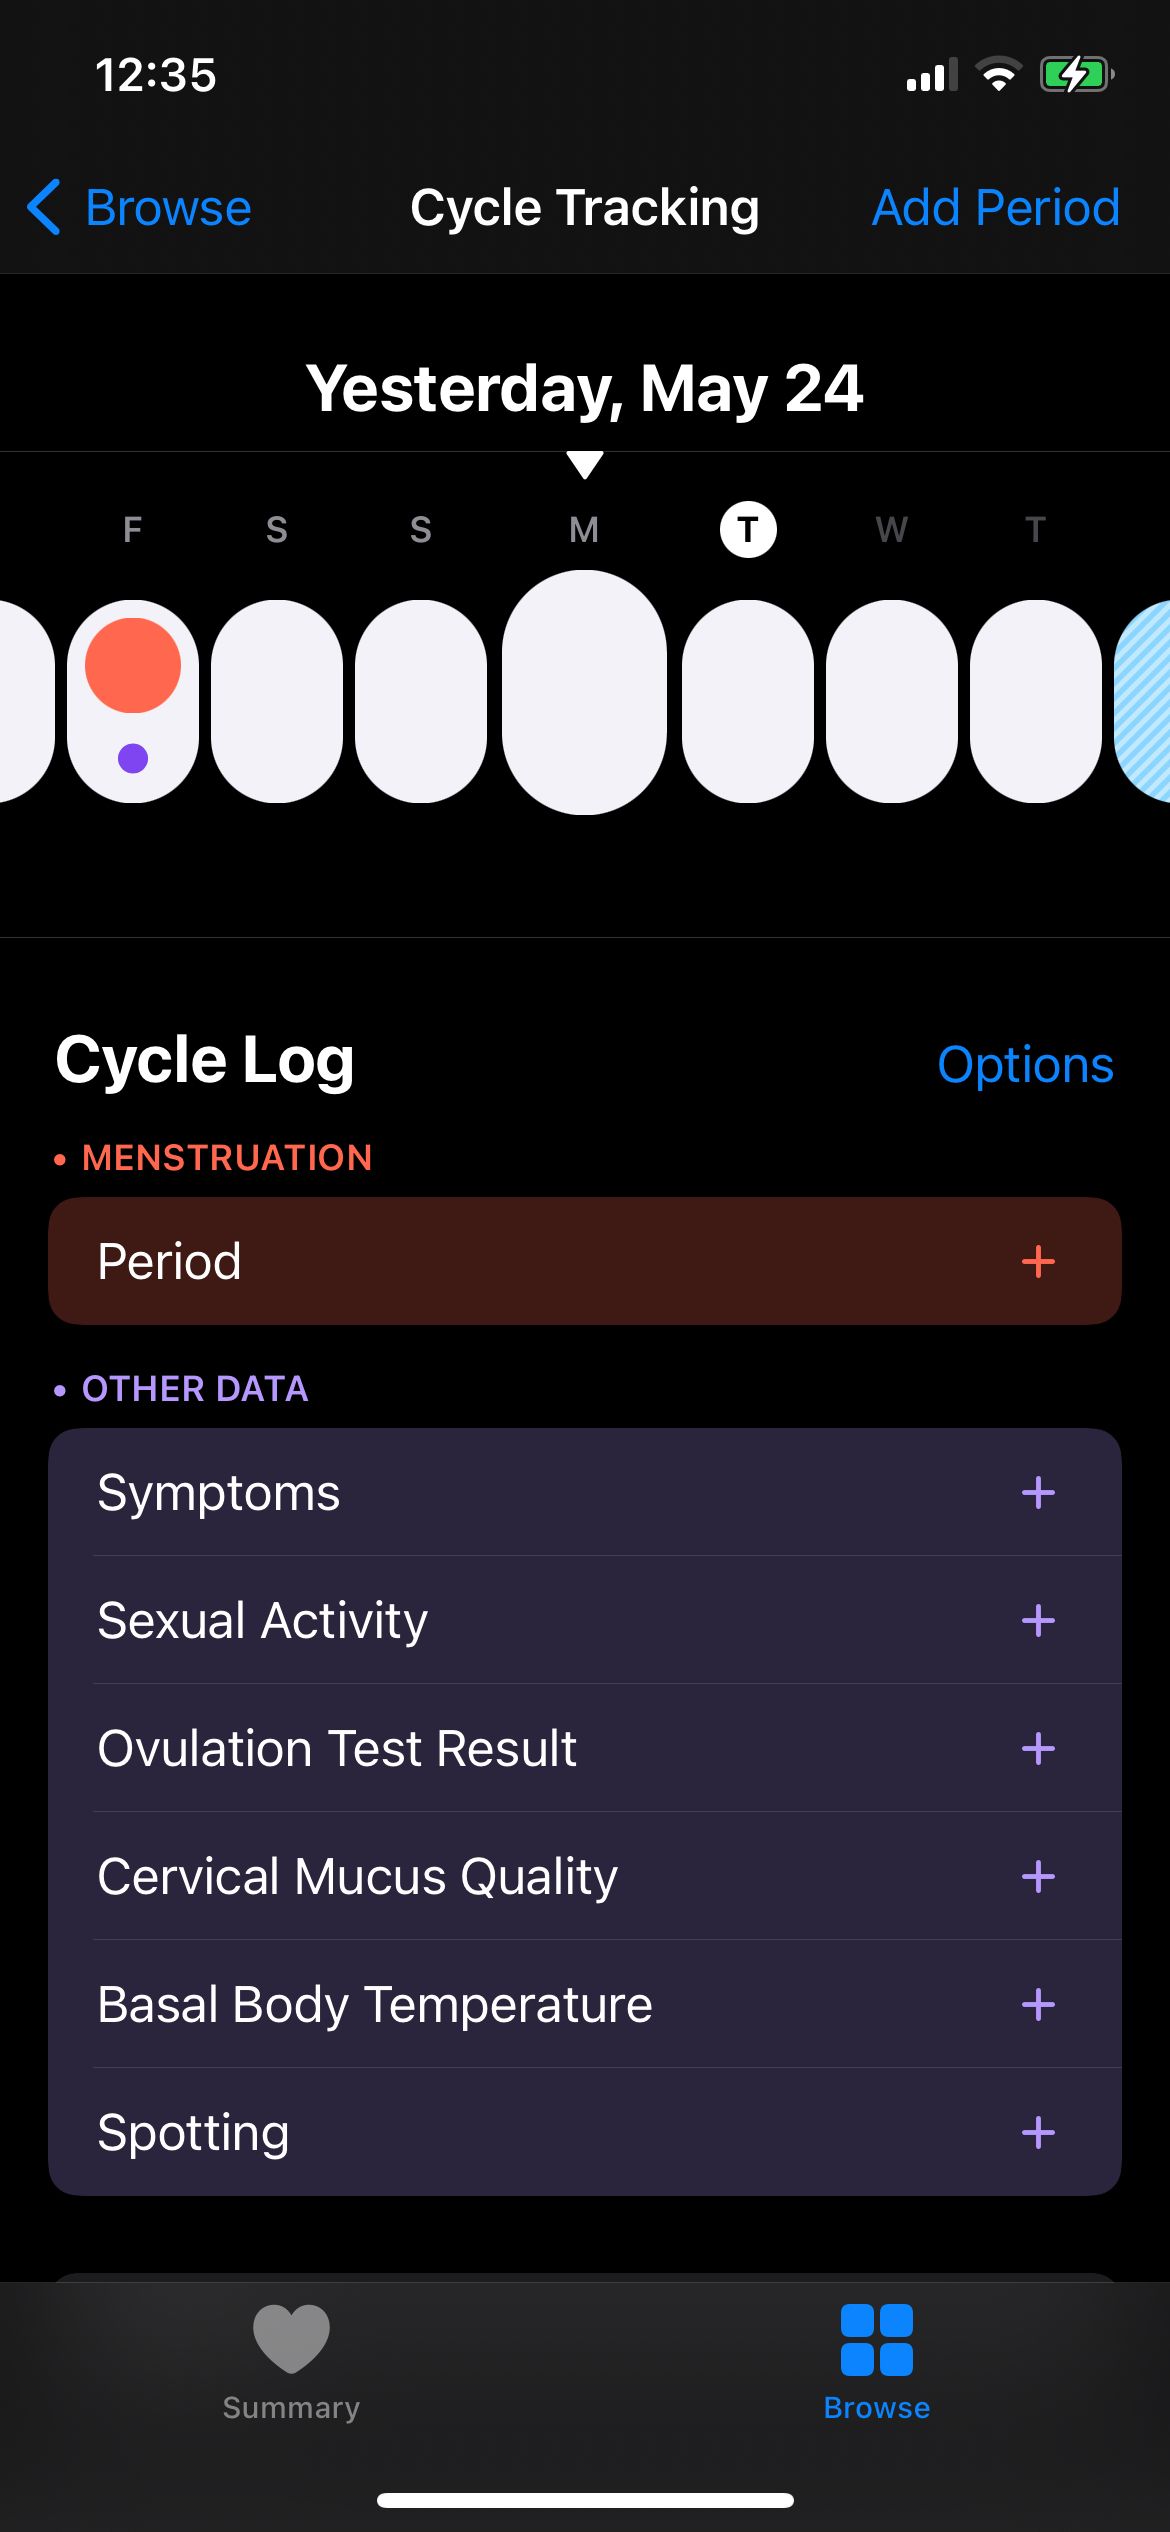 Cycle Tracker Colors, Solid Red and small purple dot